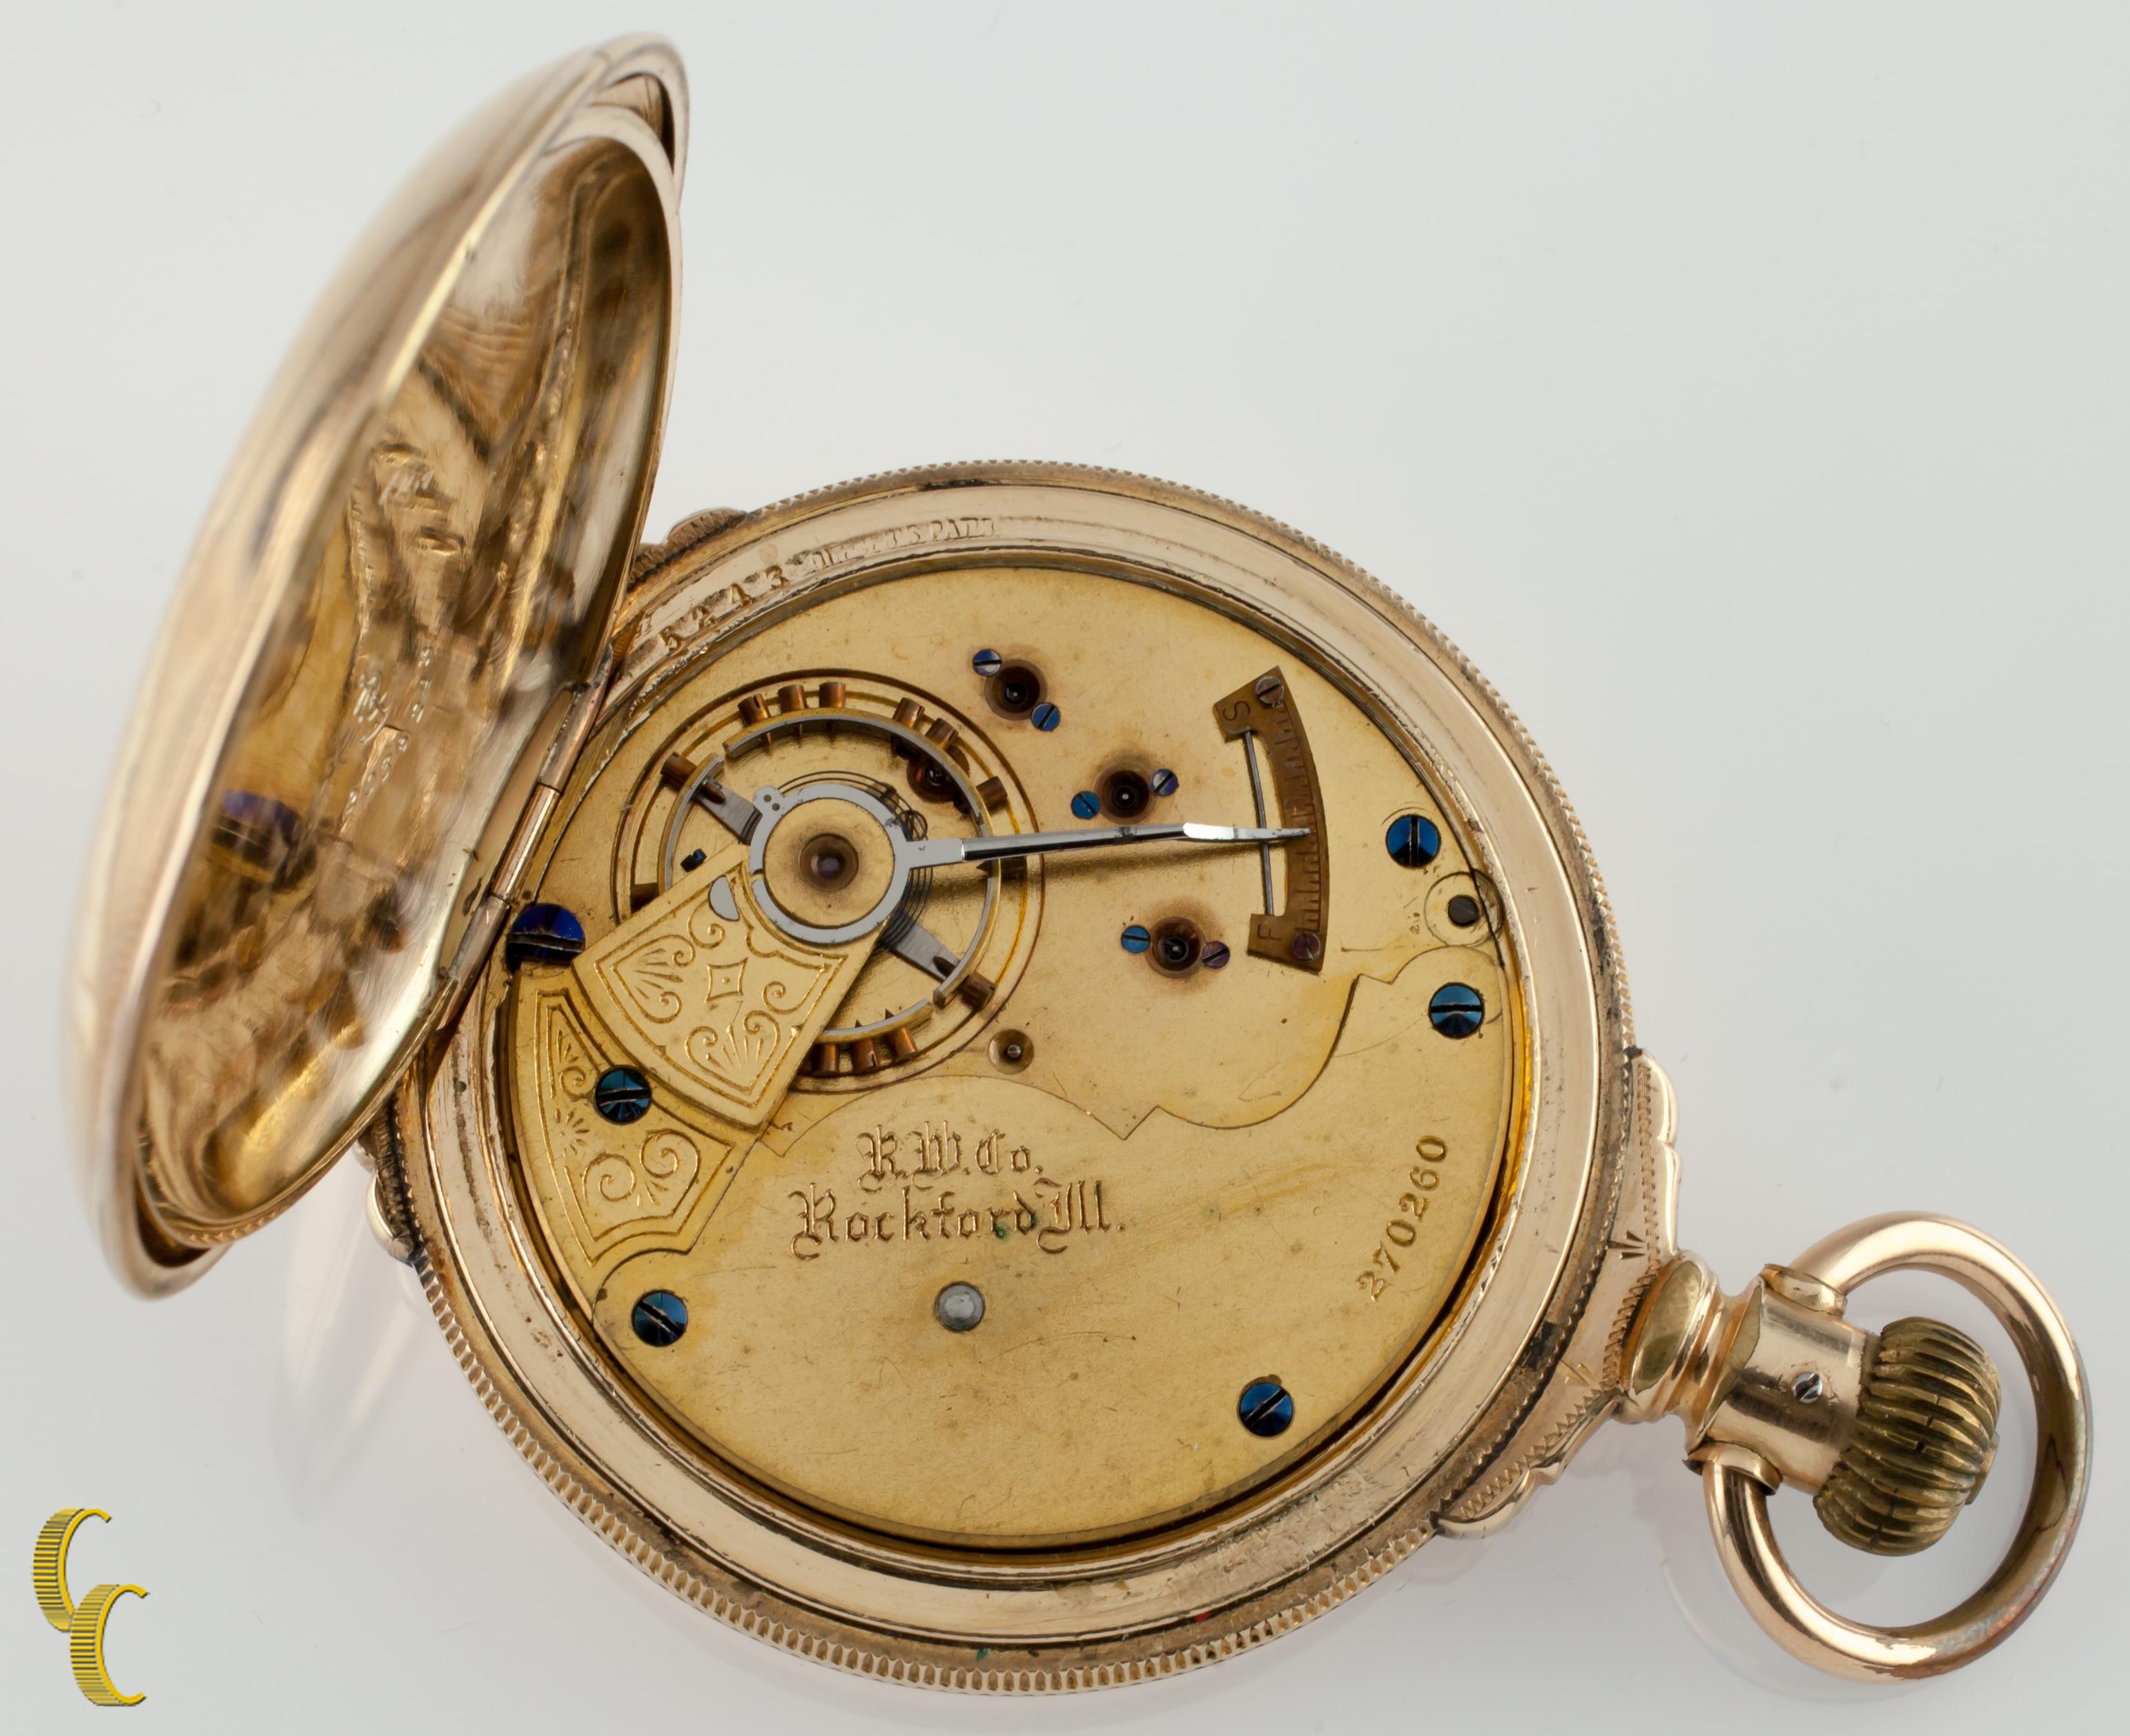 Beautiful Antique Rockford Pocket Watch w/ White Dial Including Cobalt Blue Hands & Dedicated Second Dial
14k Yellow Gold Filled Case w/ Intricate Hand-Etched Design on Front and Back of Case
Black Roman Numerals
Case Serial #2055243
15-Jewel